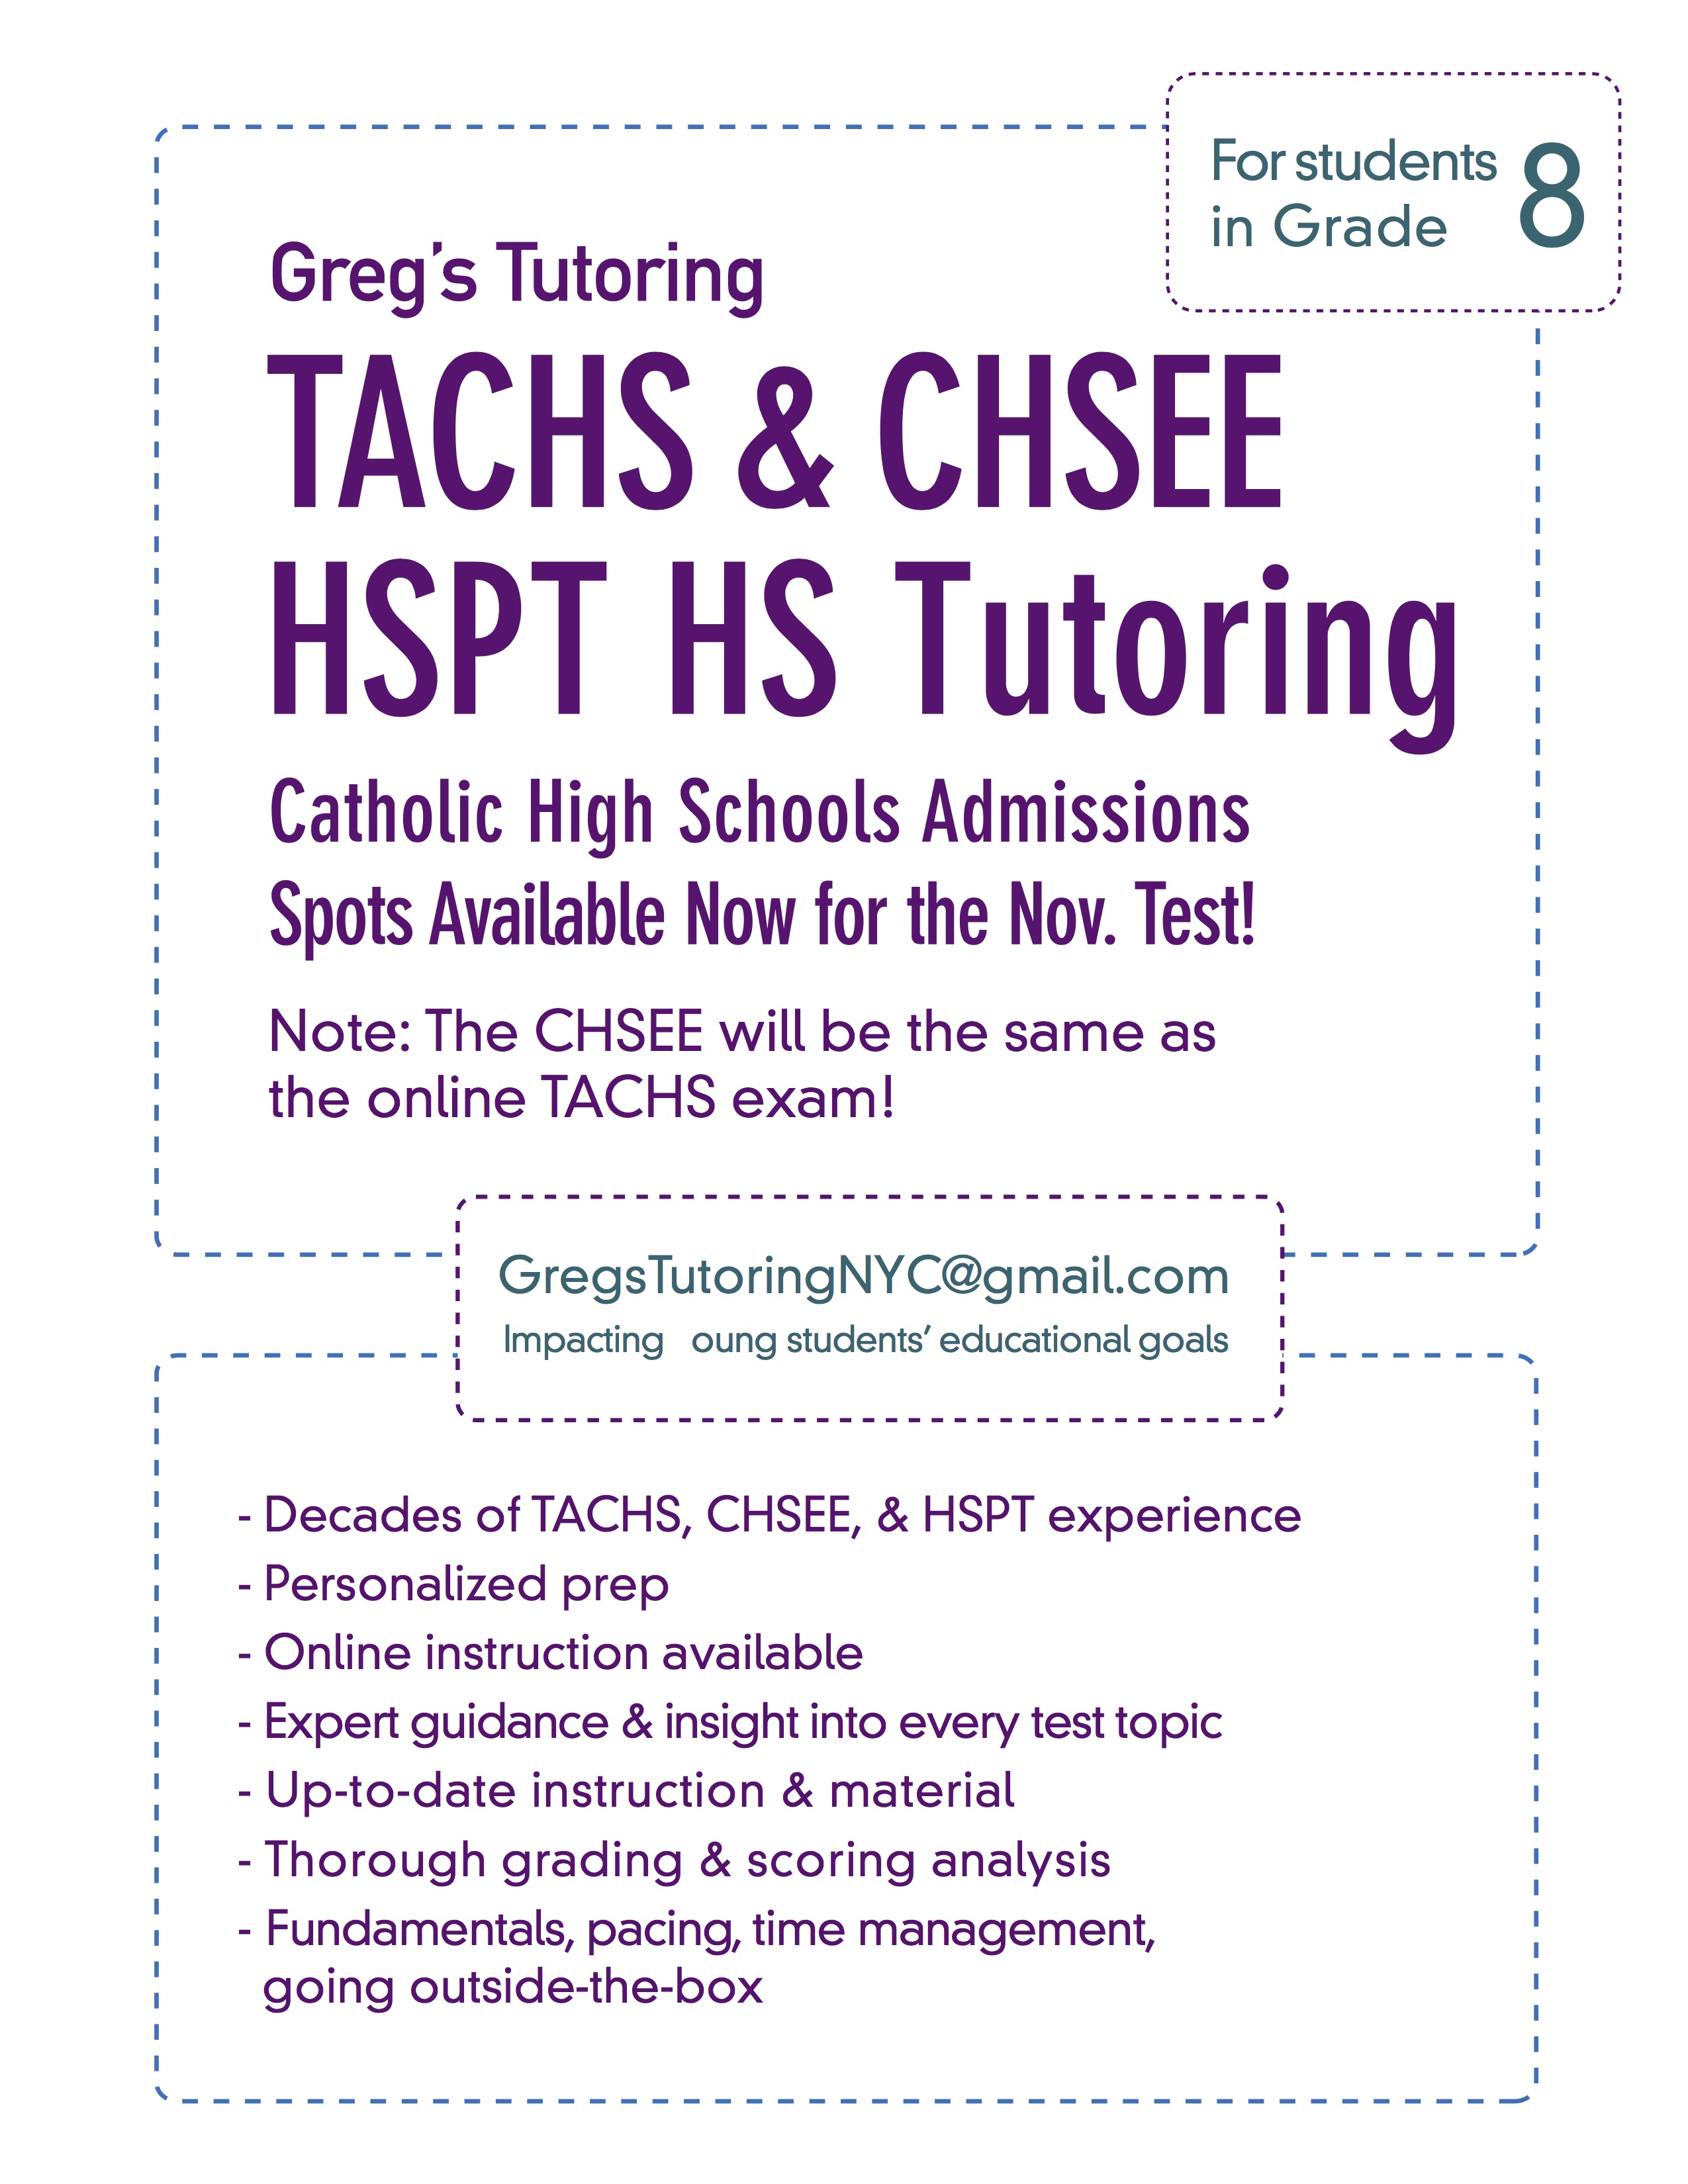 TACHS CHSEE HSPT Catholic HS AdmissionsTutoring Available Now